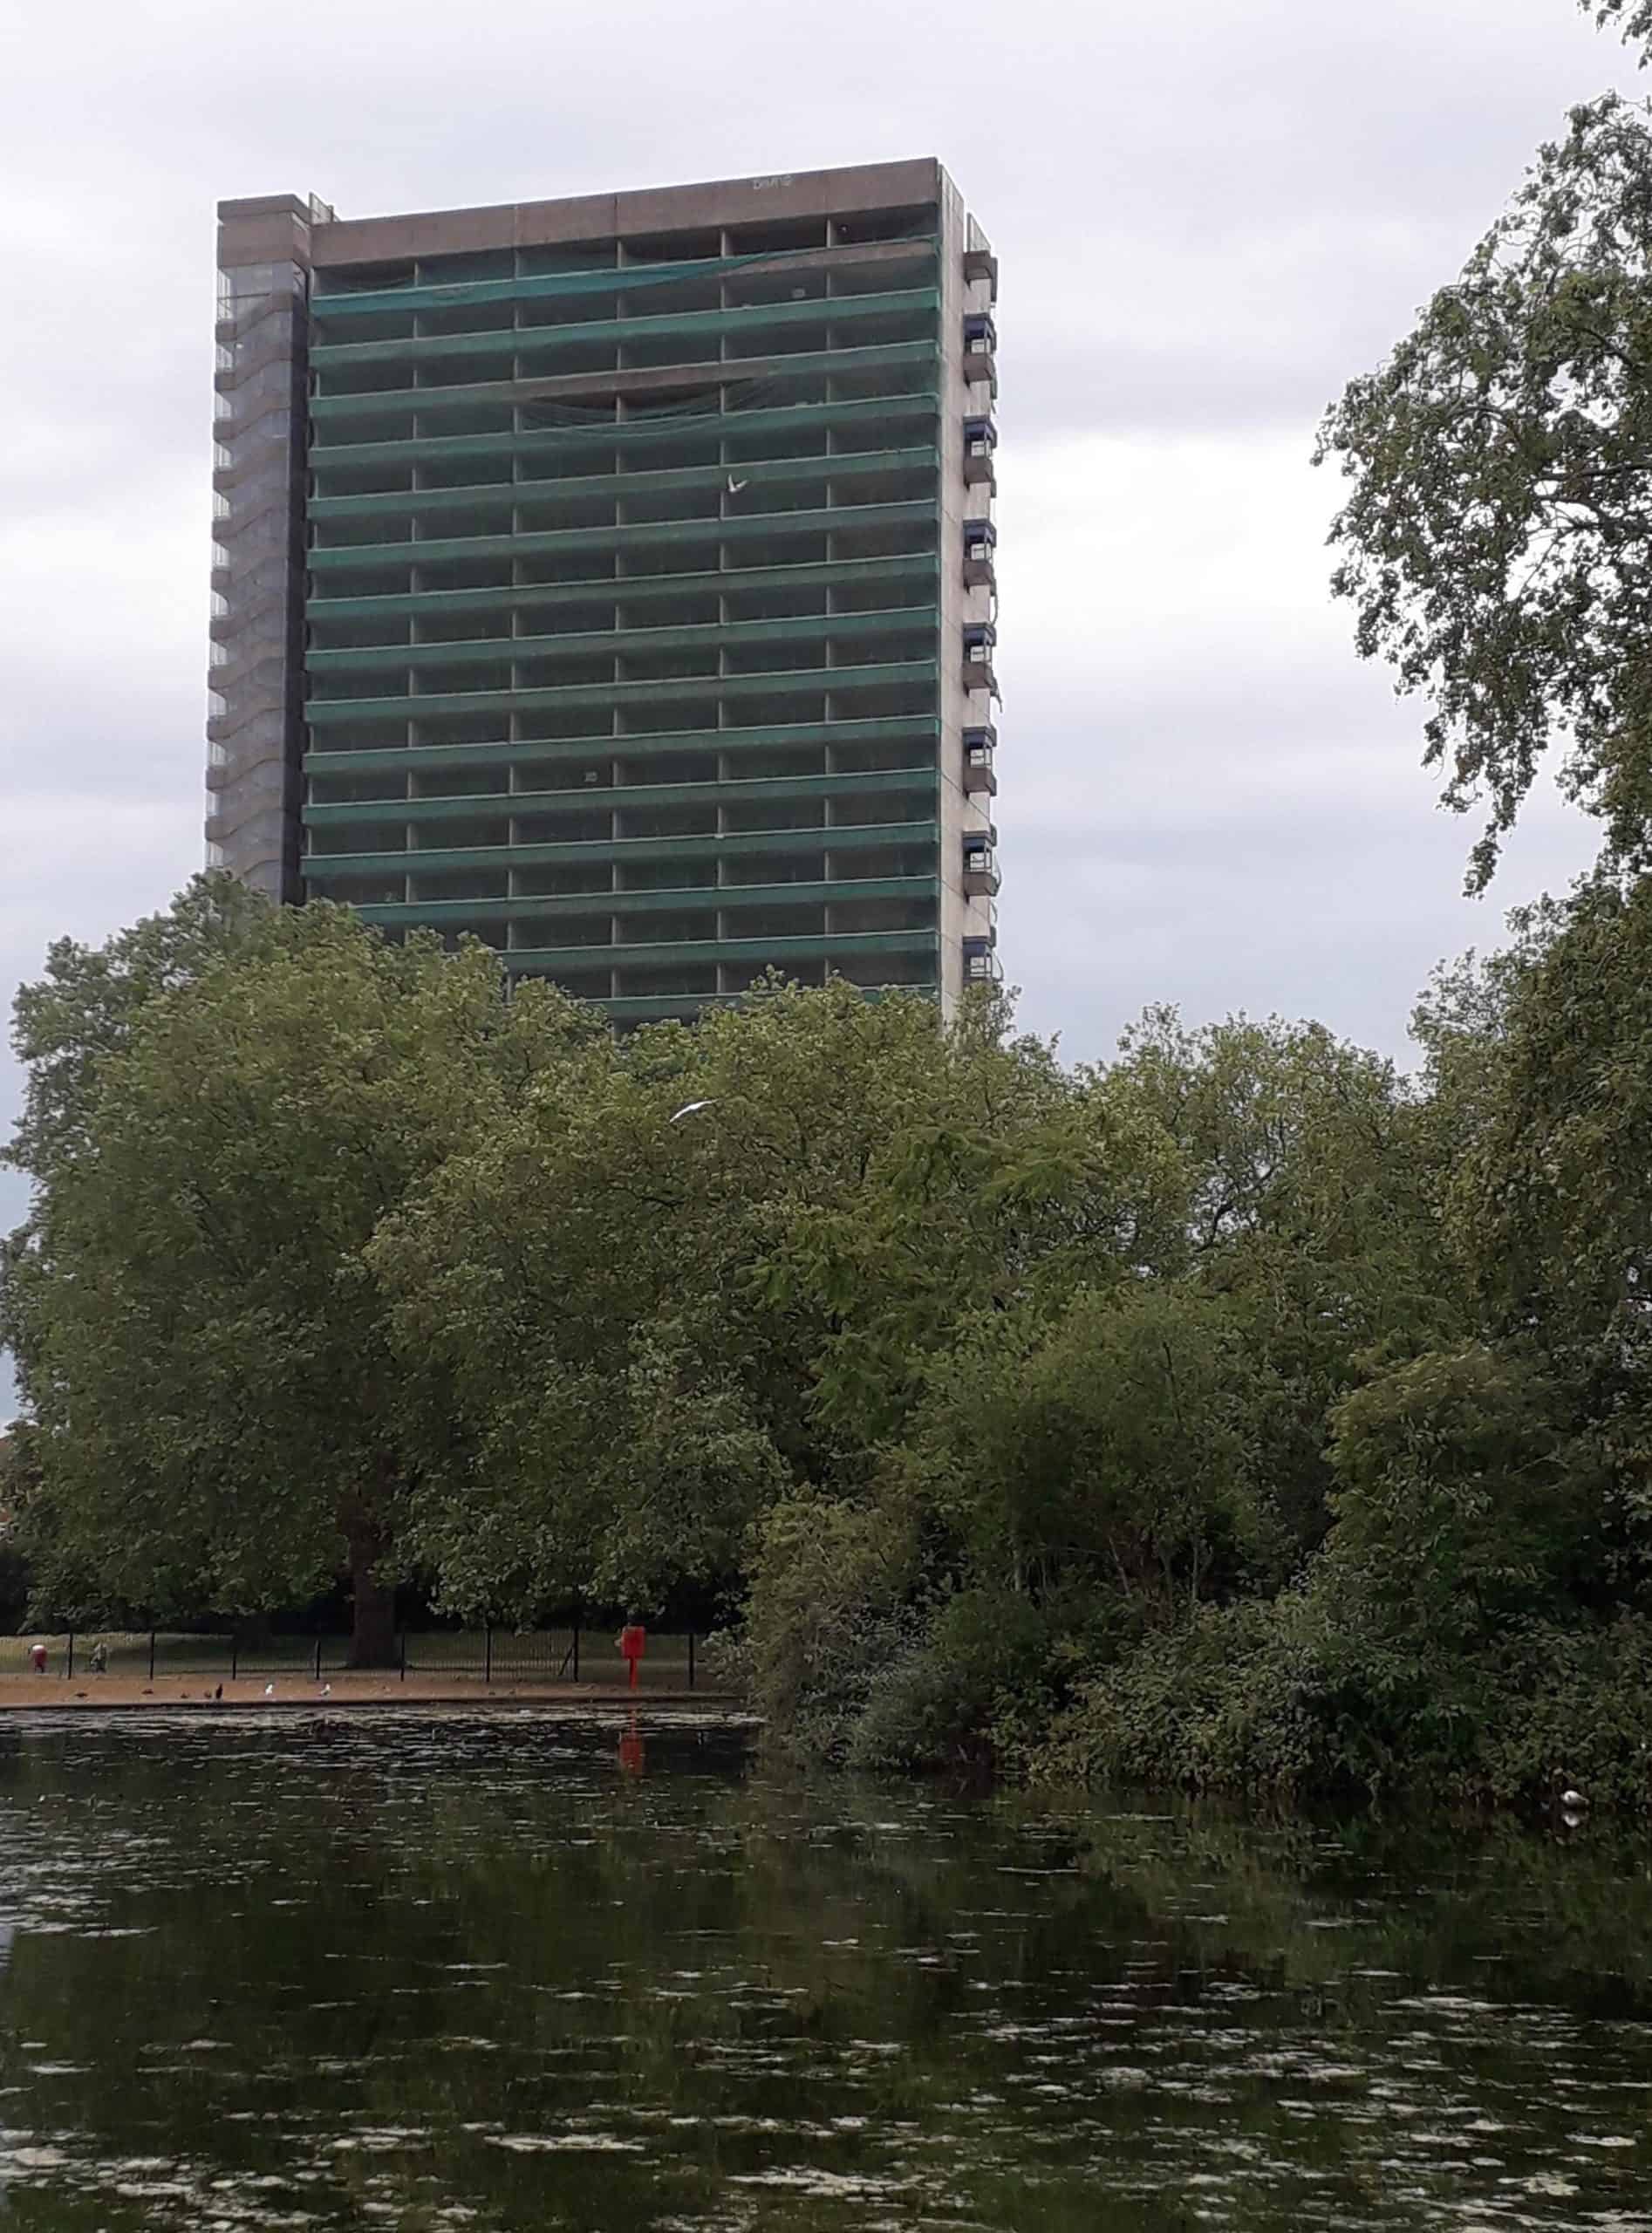 The view of Maydew House from Southwark Park